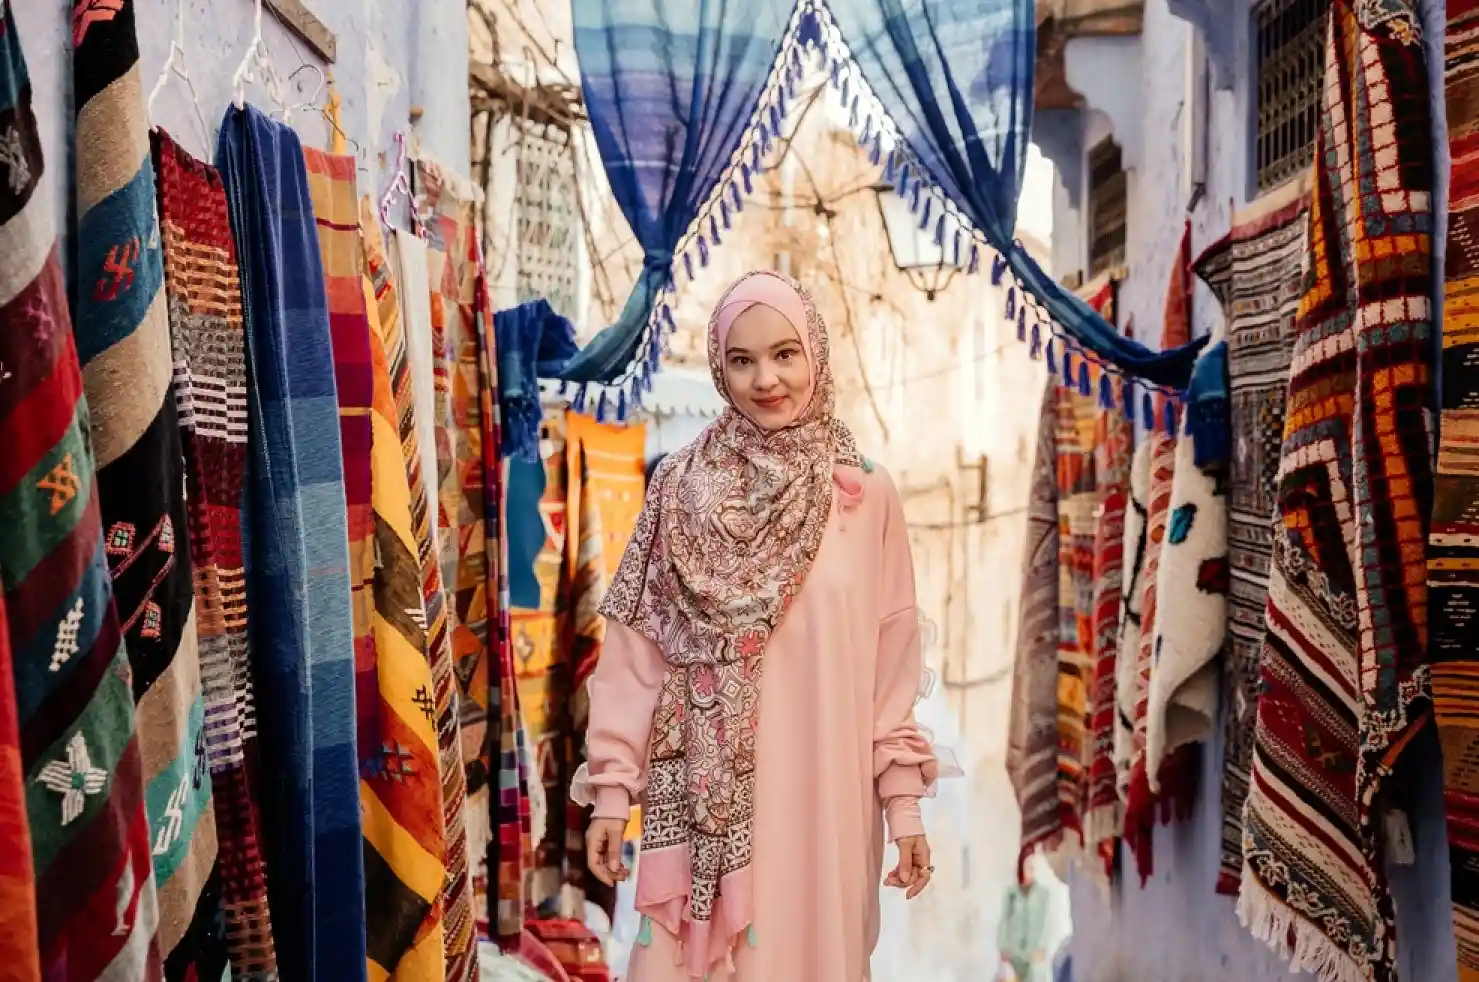 What-to-Wear-in-Morocco-in-December-modest-attire.webp